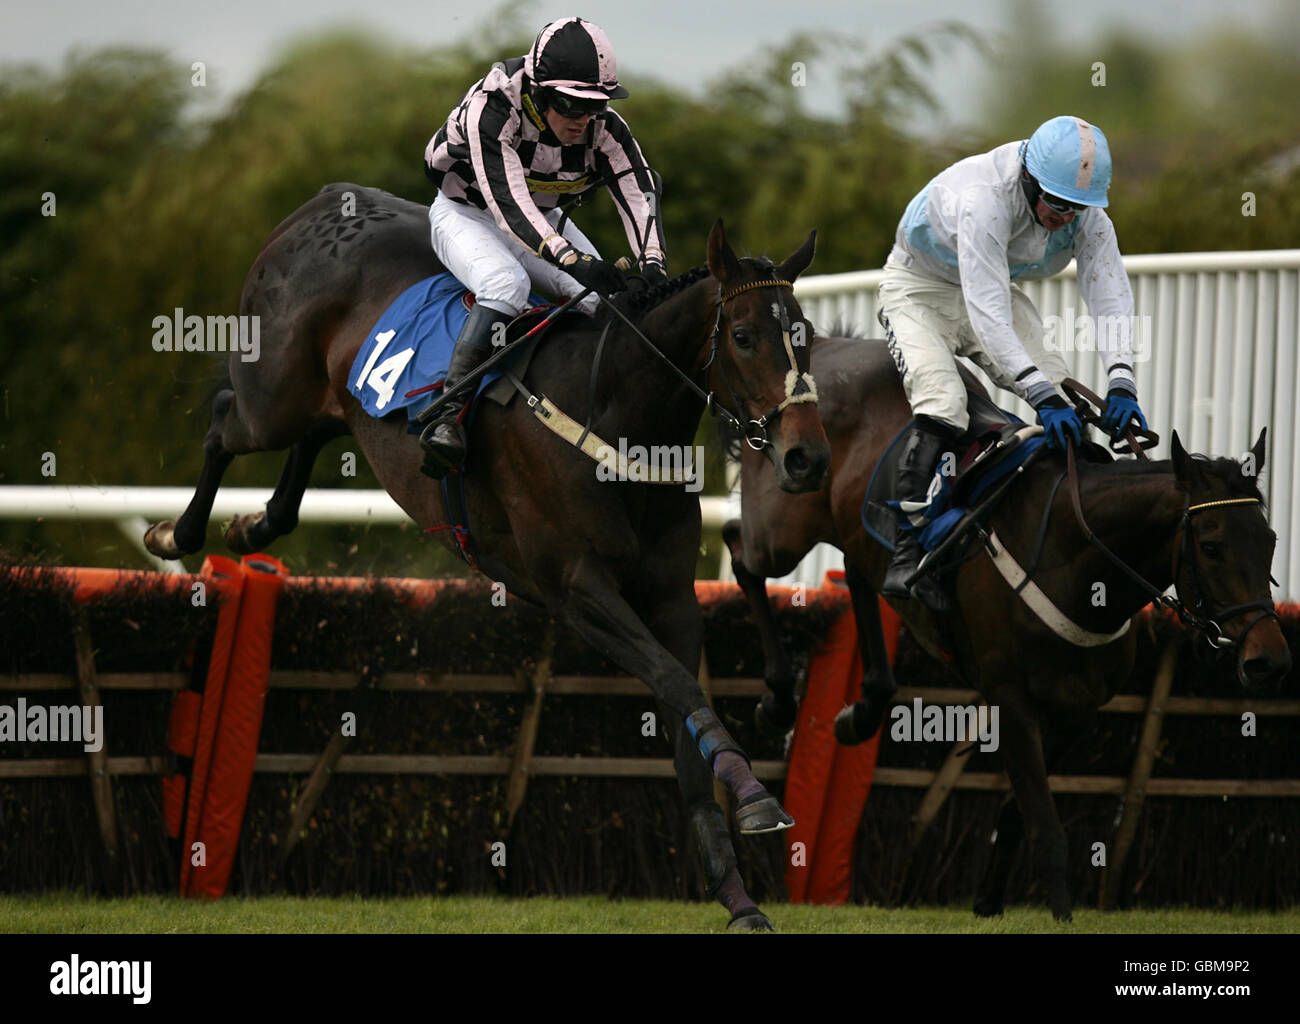 Sylroy ridden by jockey Peter Toole (L) jumps the last fence to win the Wye Valley Brewery Mares' Novices' Hurdle Race at Hereford Racecouse Stock Photo